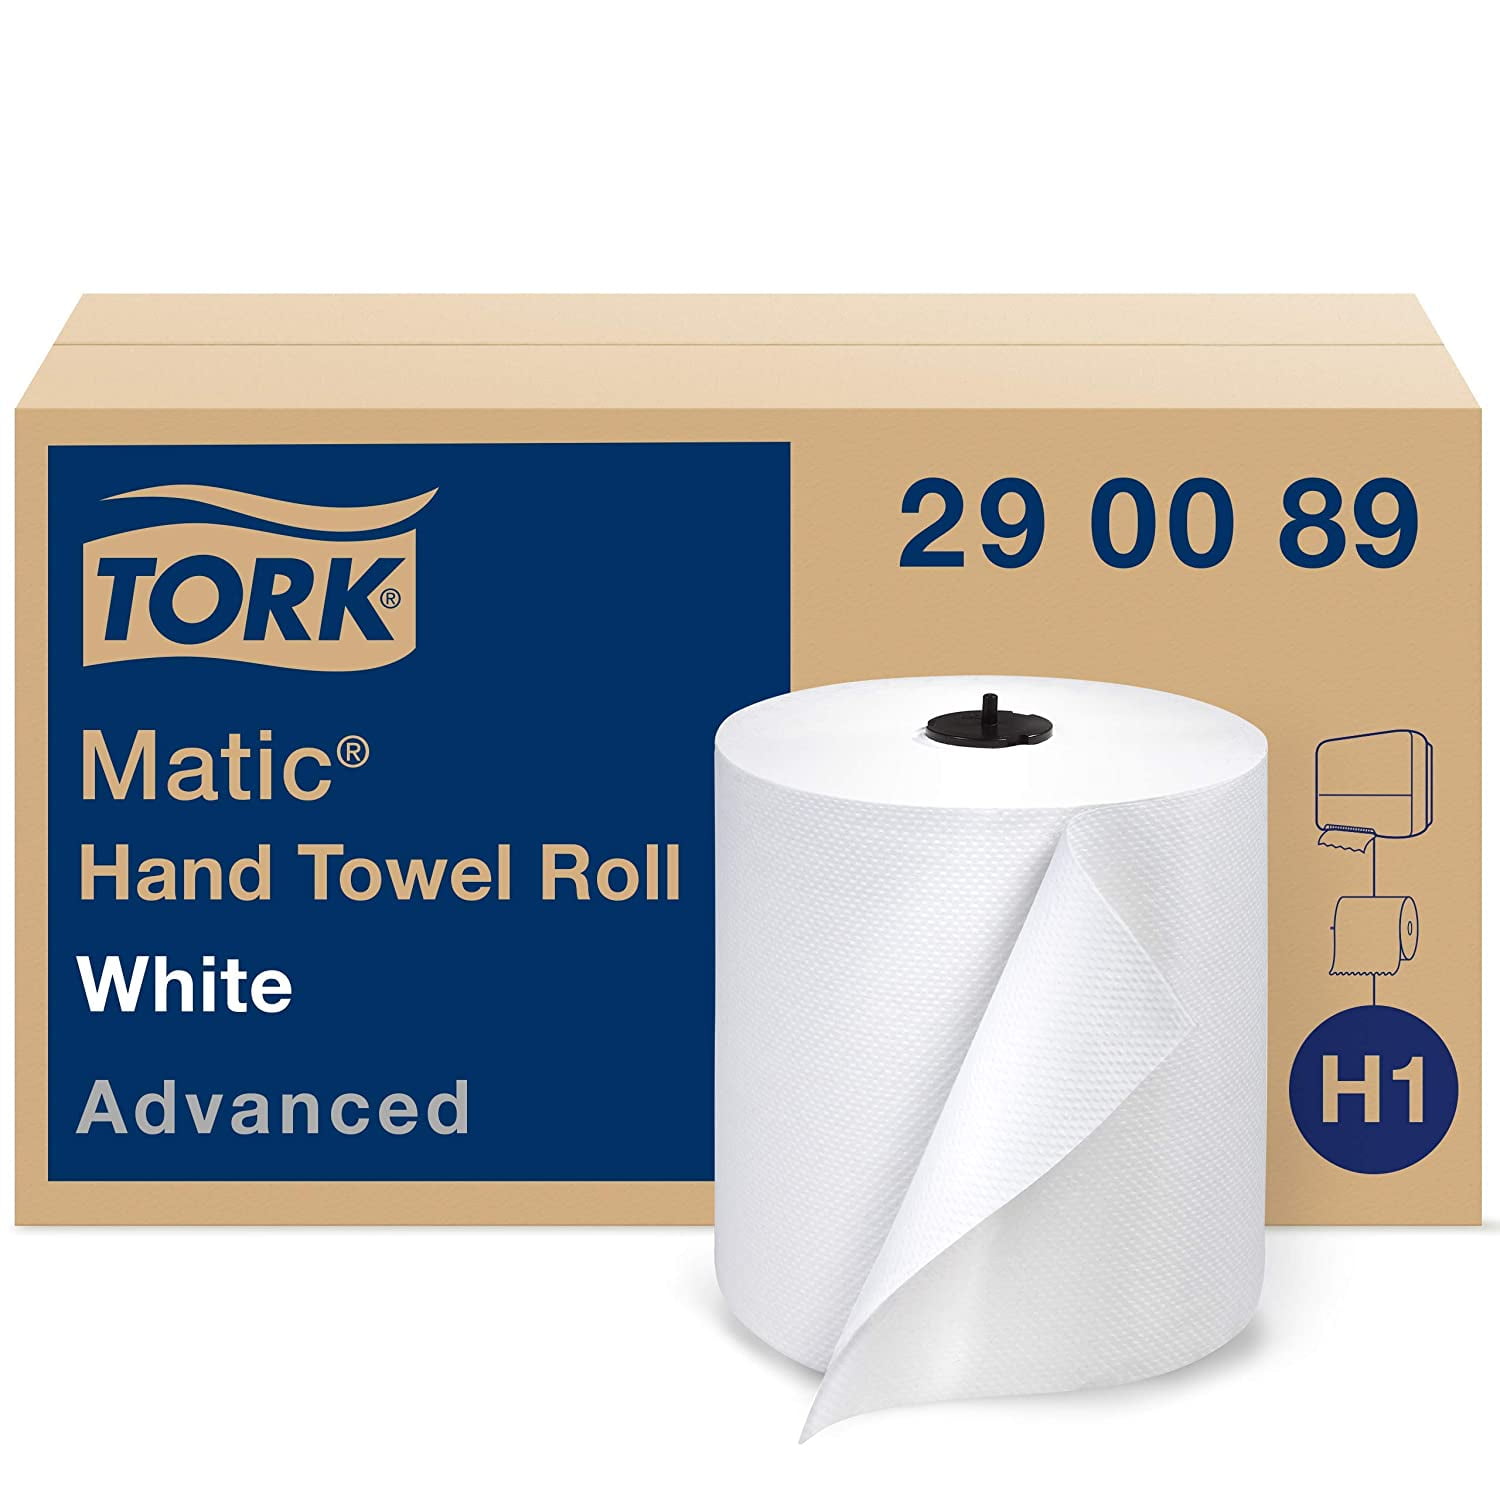 Tork Matic Advanced Paper Towel Roll H1 Paper Hand Towel 290089 100% Recycled 